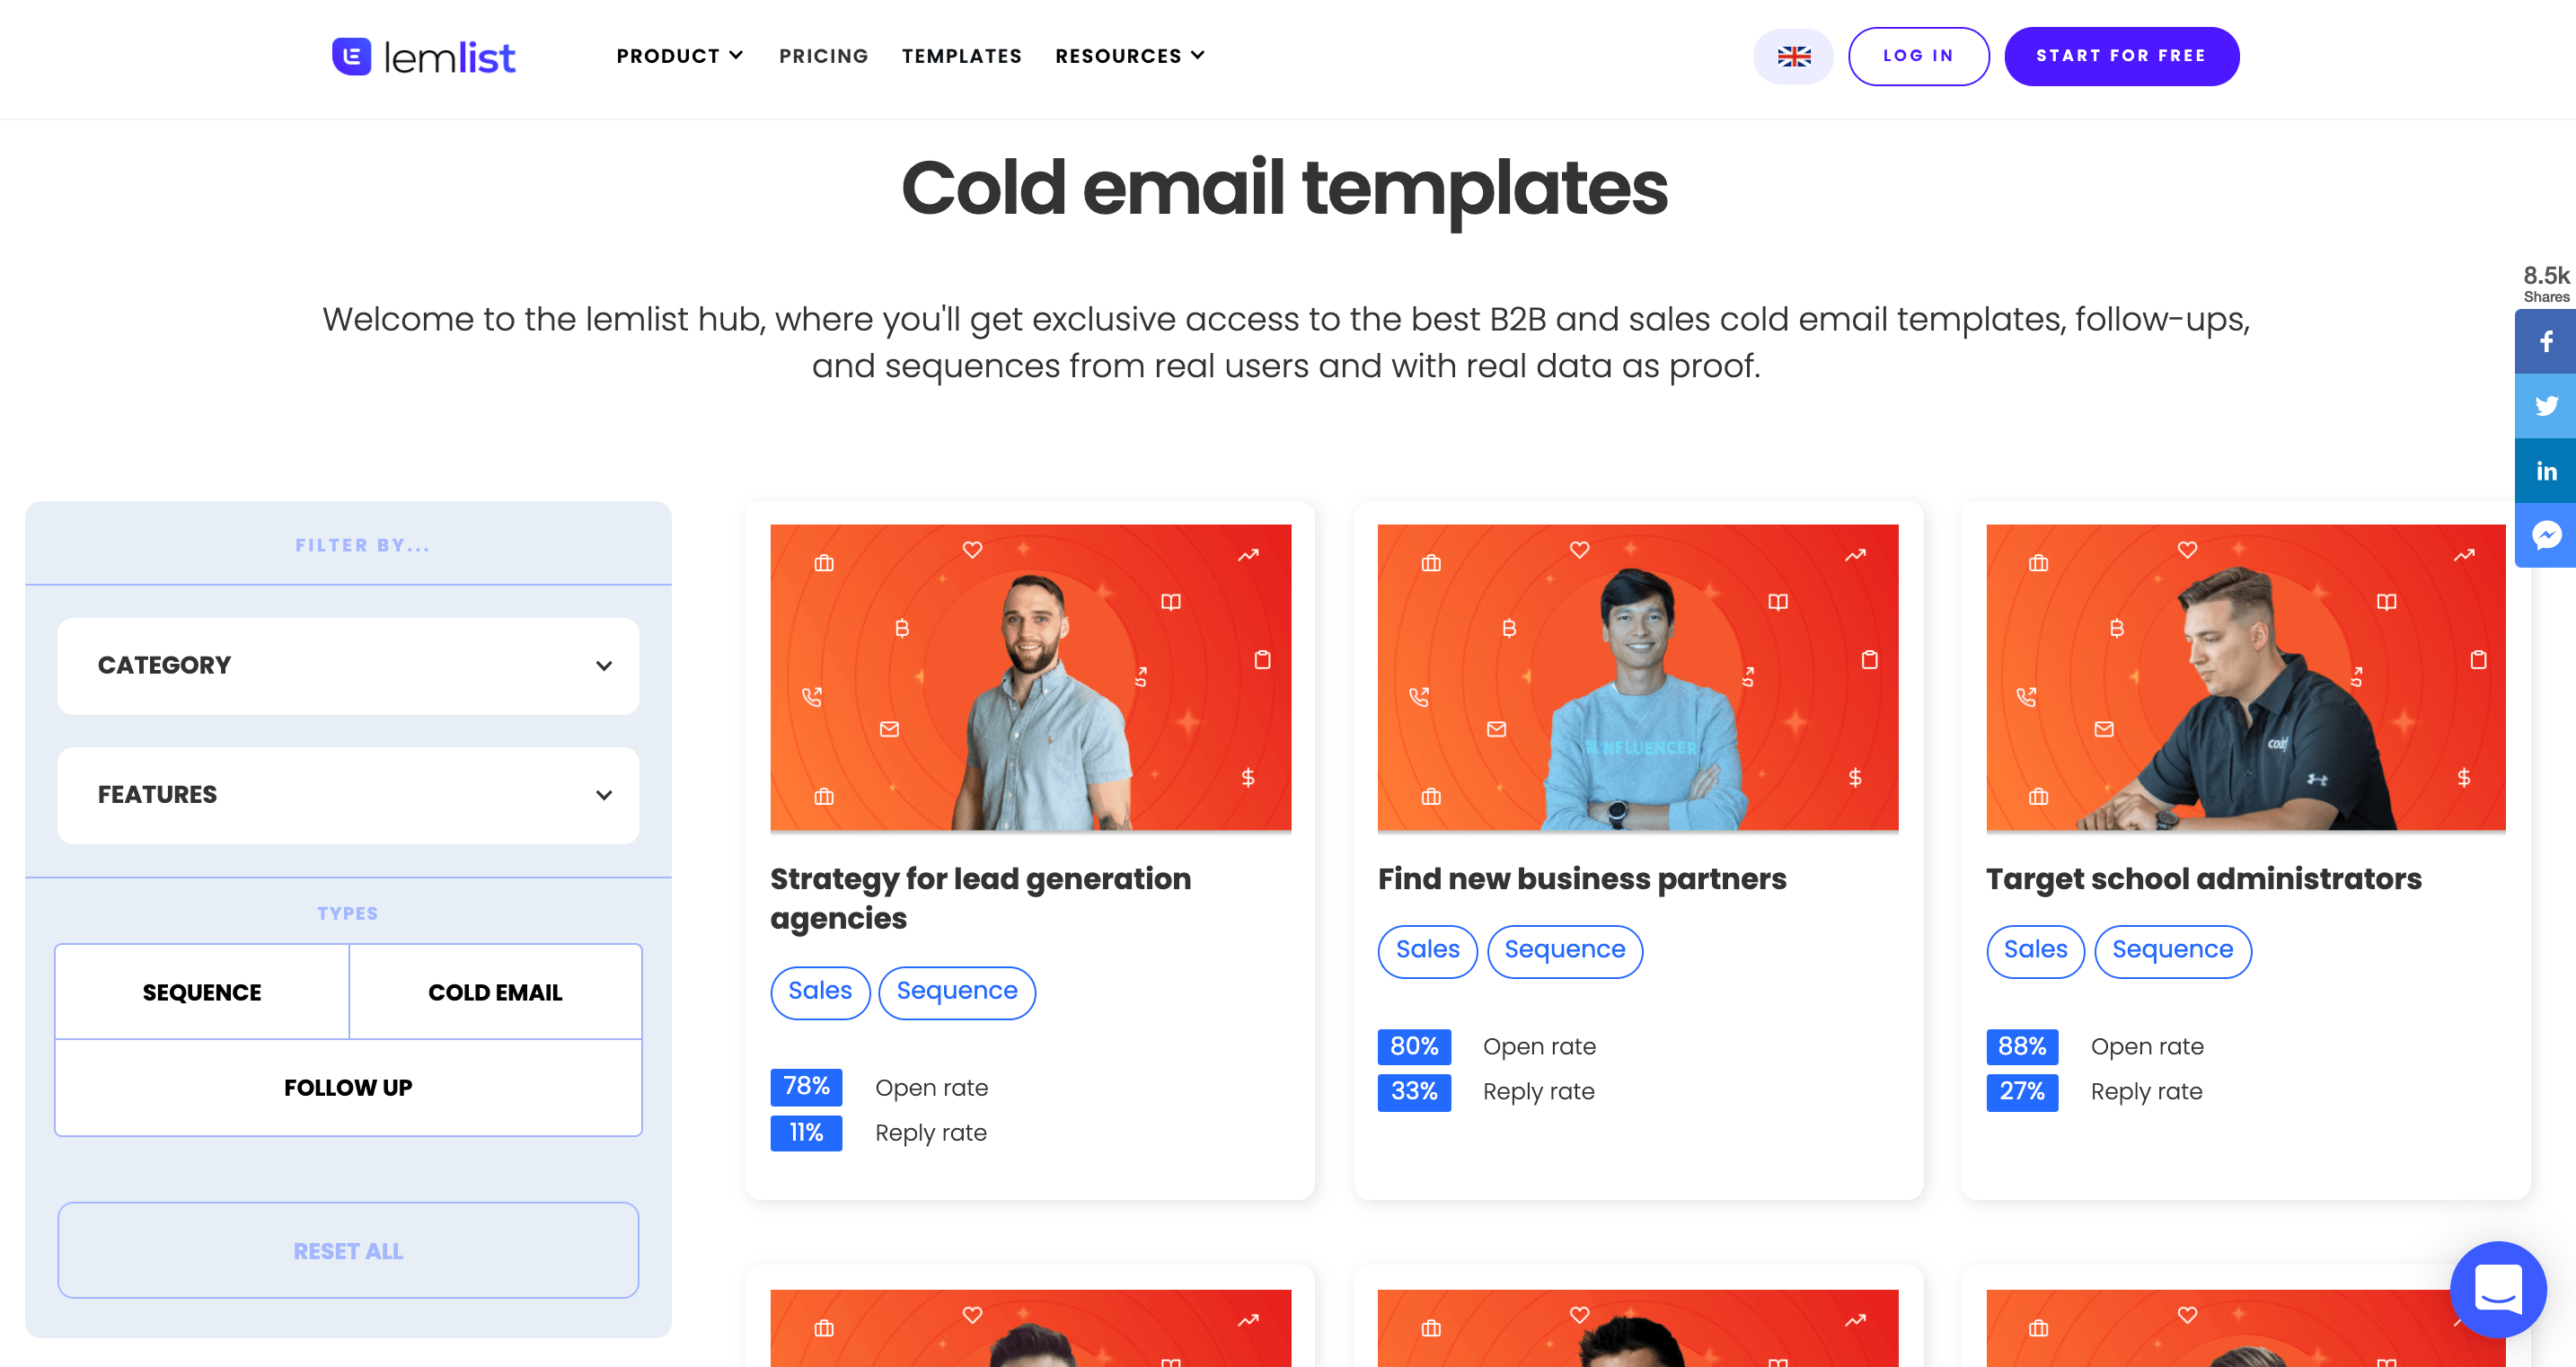 Cold Email Templates by Lemlist